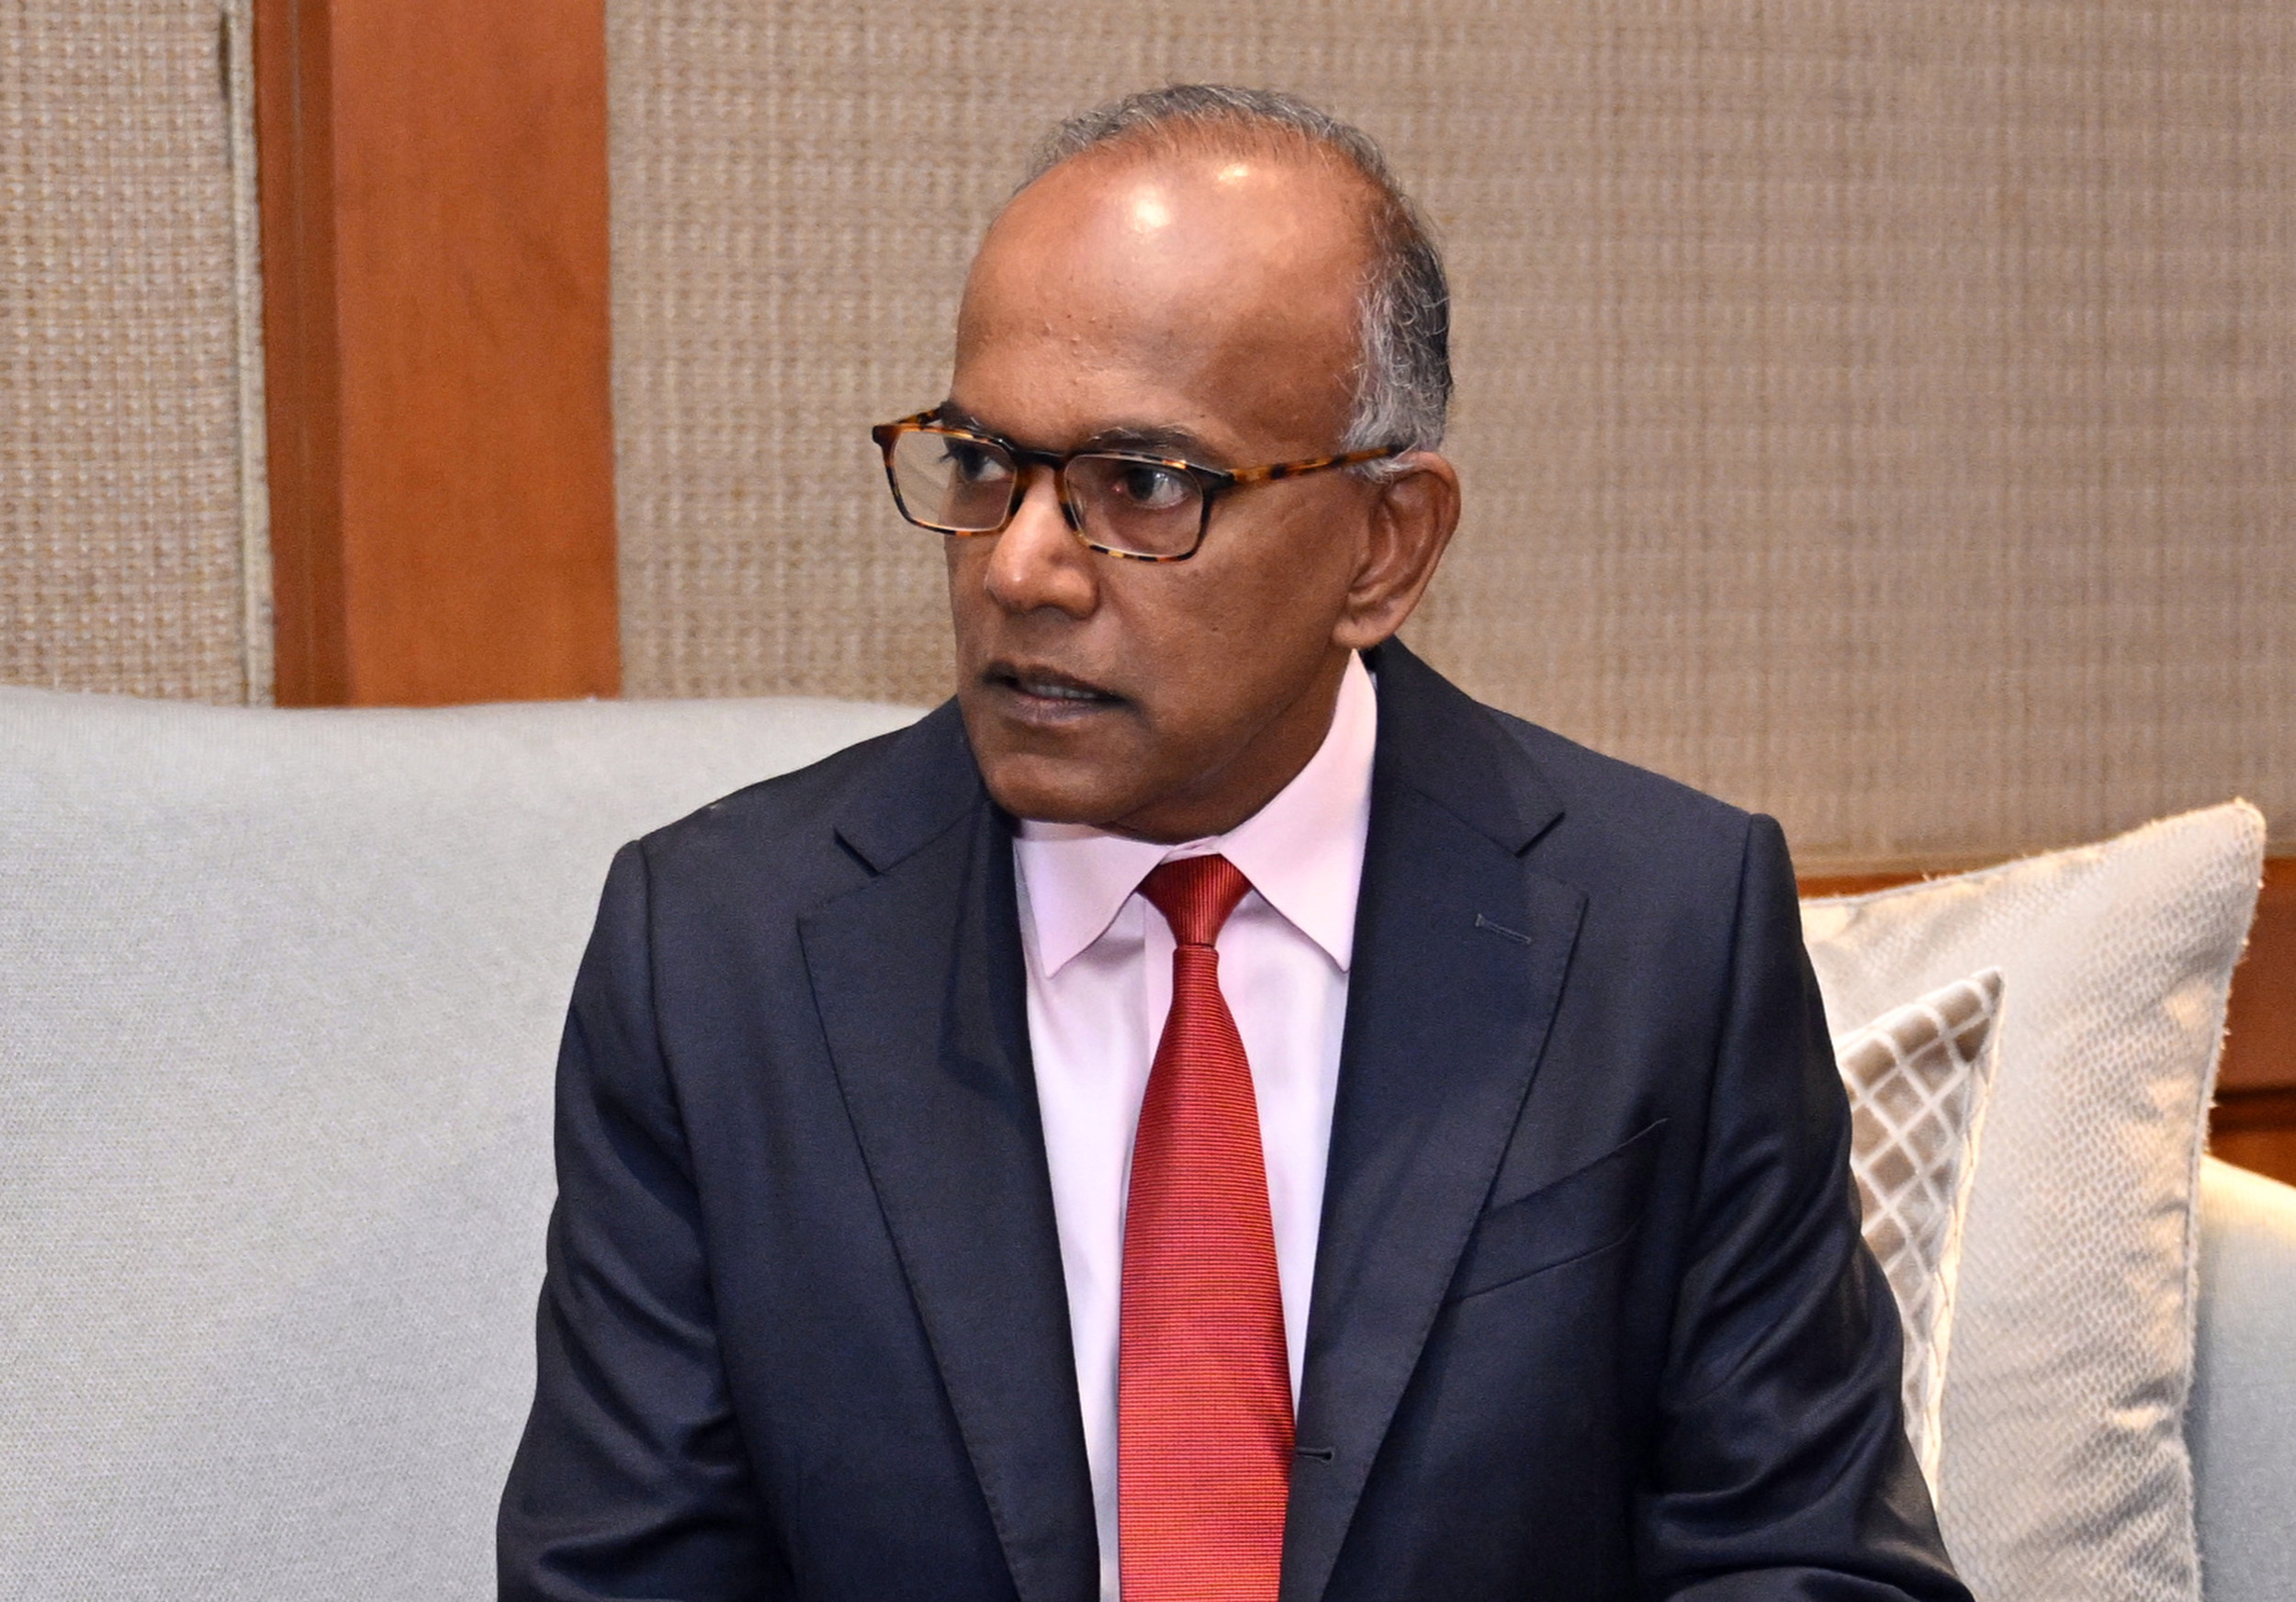 Singapore Law and Home Affairs Minister K Shanmugam pictured on the sidelines of a South China Morning Post conference in Singapore last year. Photo: Handout